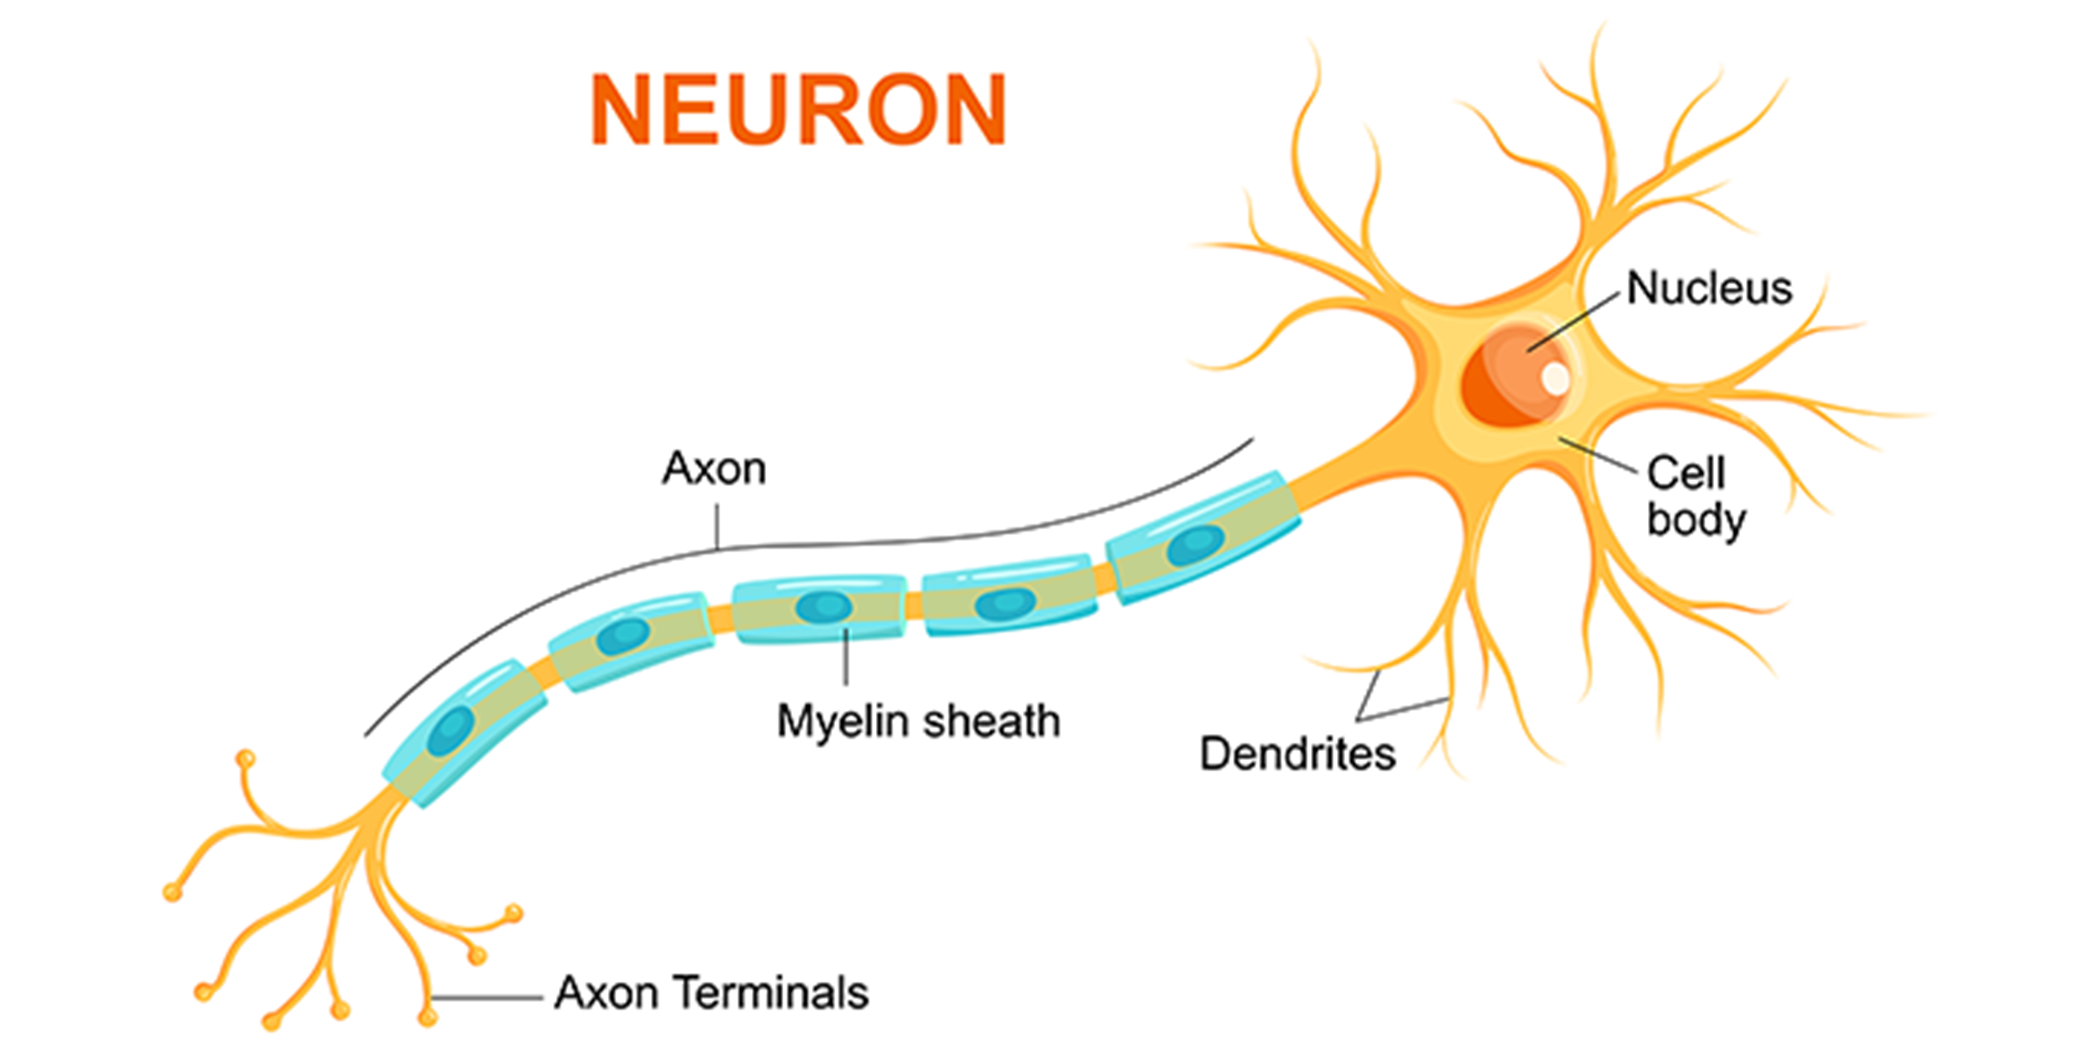 What Is Nerve Growth Factor?